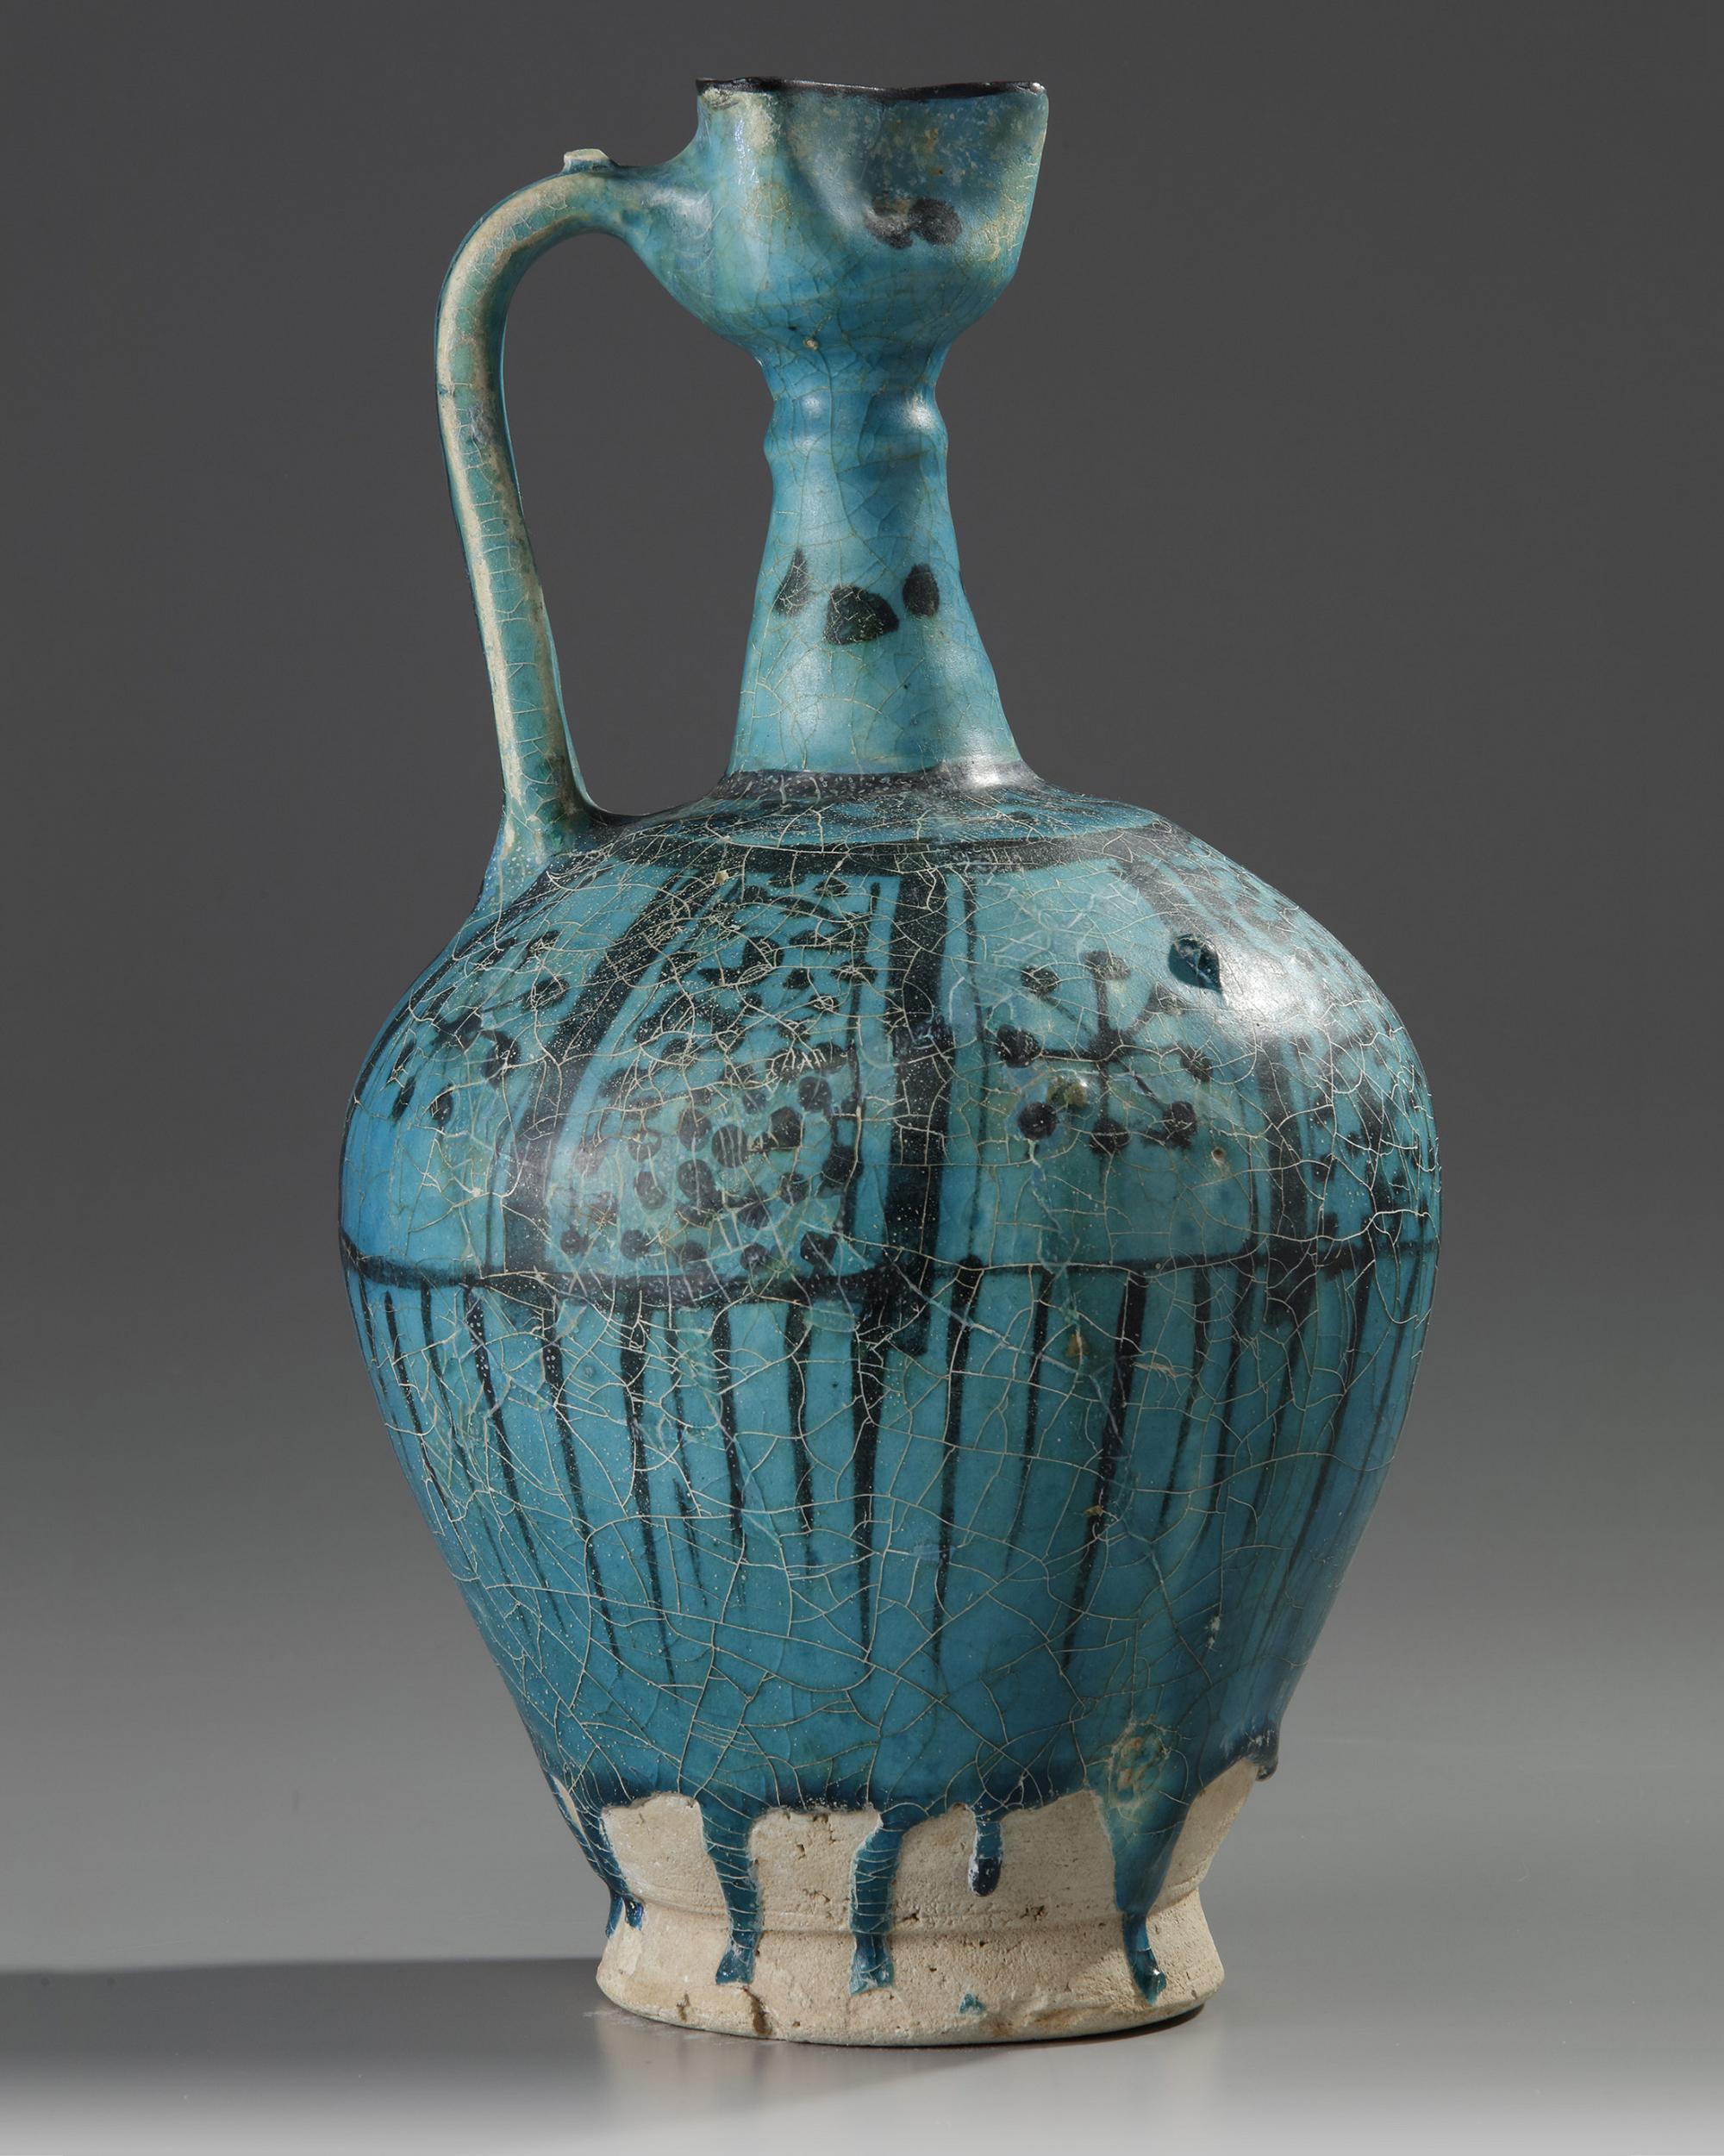 A LARGE RAQQA UNDERGLAZE PAINTED POTTERY EWER, SYRIA, 12TH-13TH CENTURY - Image 11 of 20